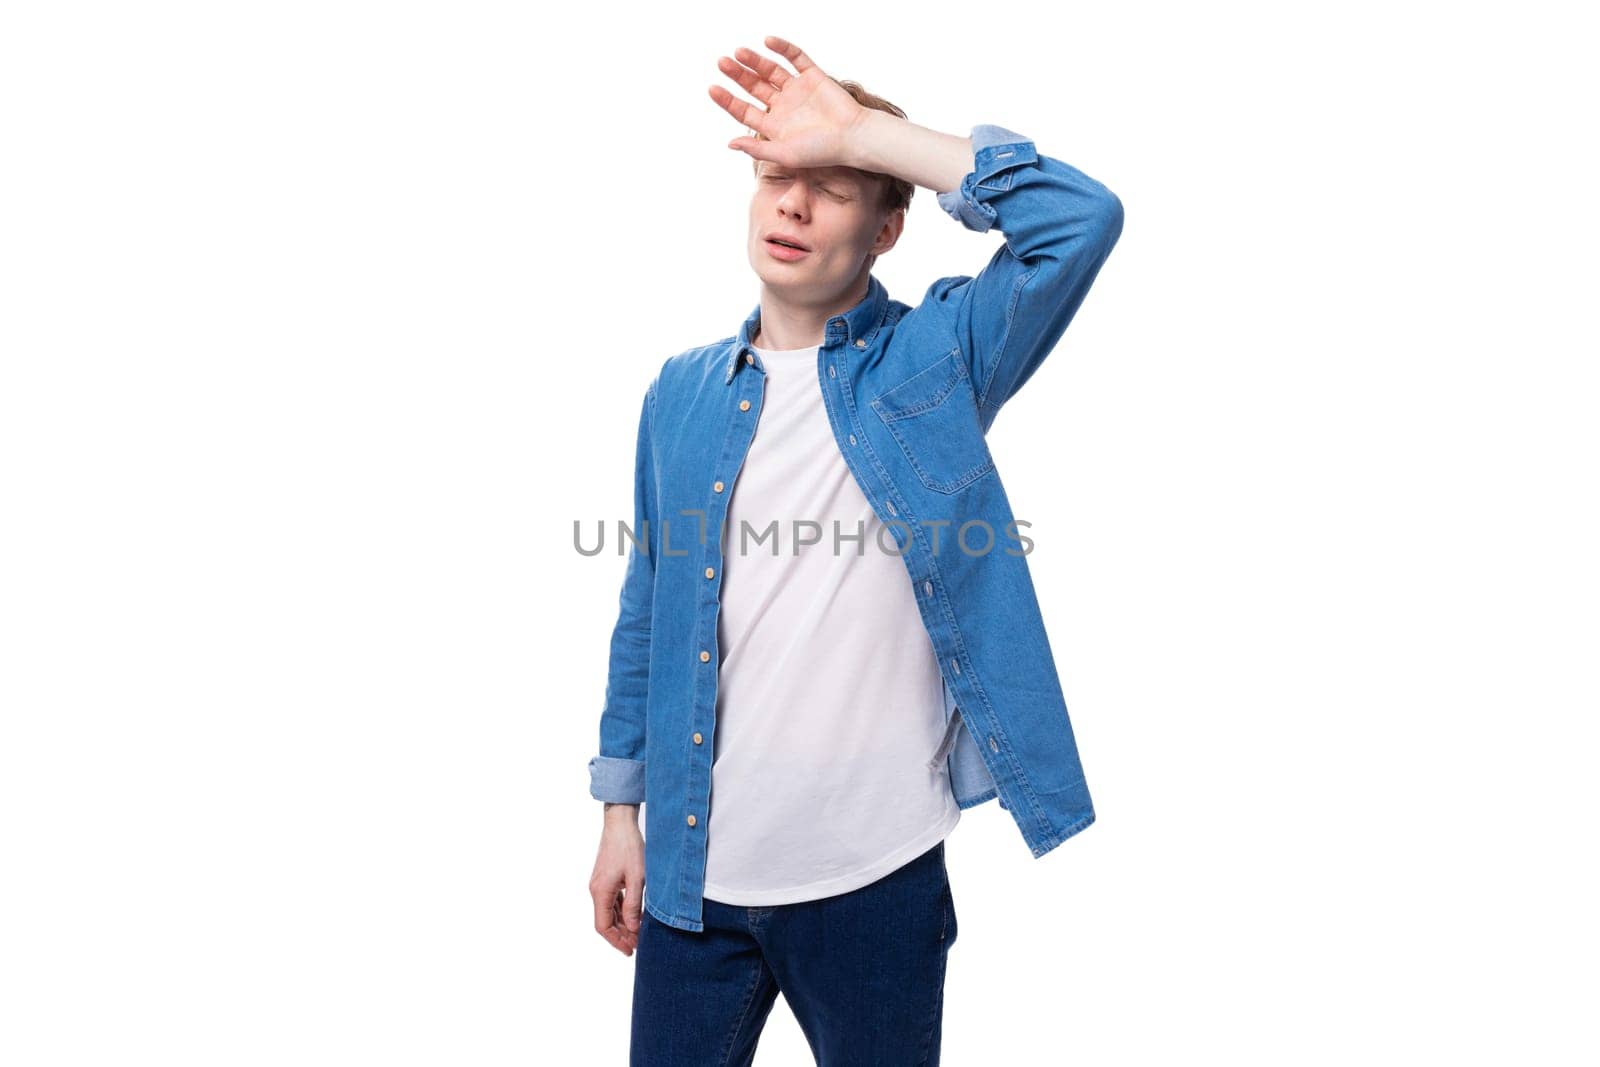 young european man with red hair wears a blue denim shirt thinks about an idea by TRMK